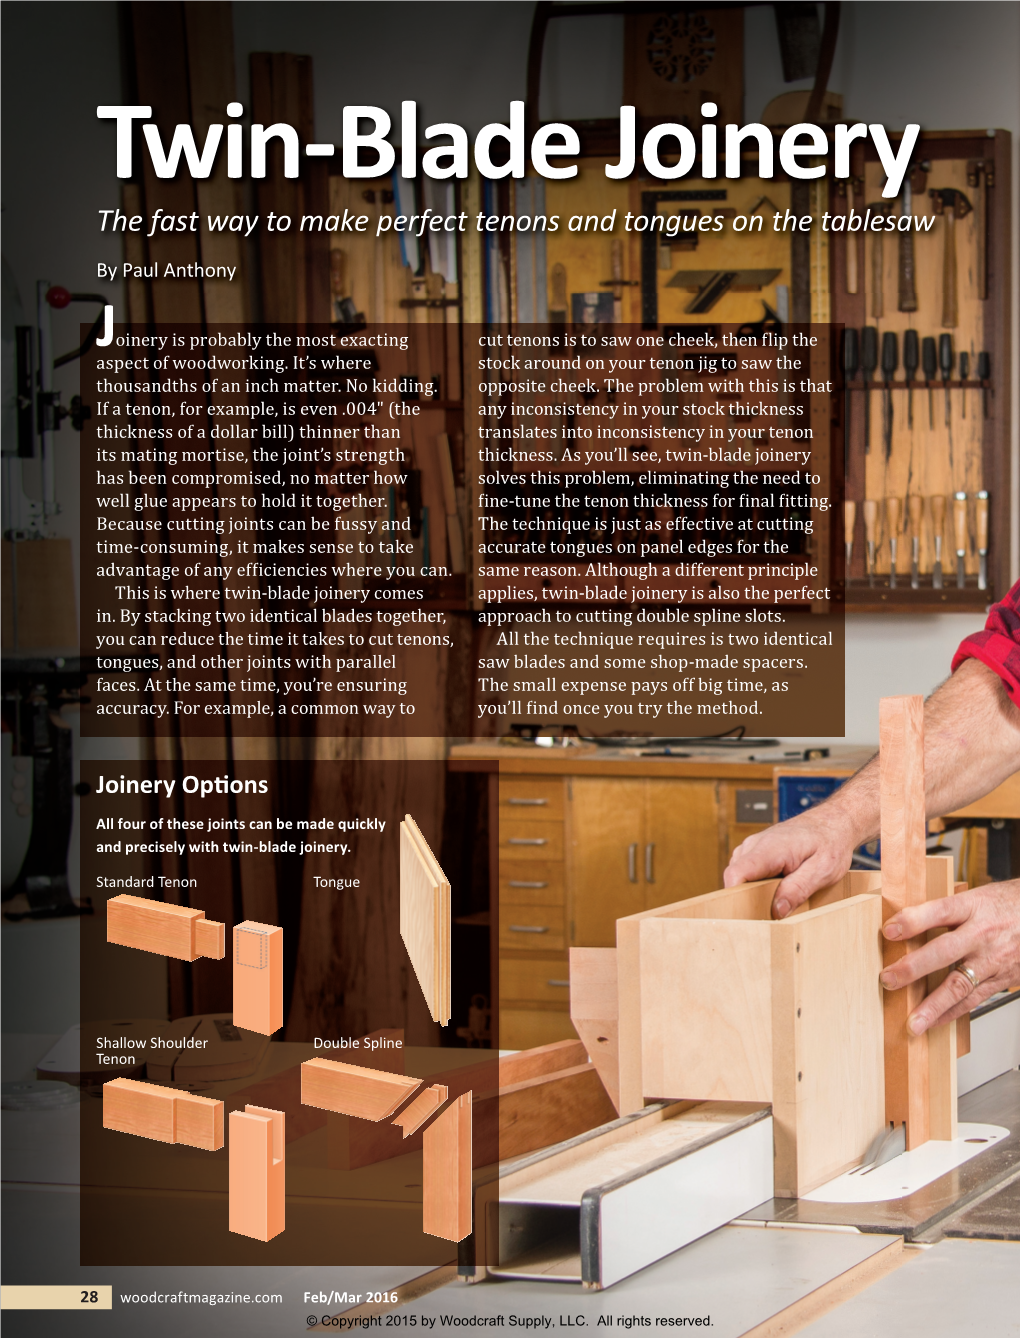 Twin-Blade Joinery the Fast Way to Make Perfect Tenons and Tongues on the Tablesaw